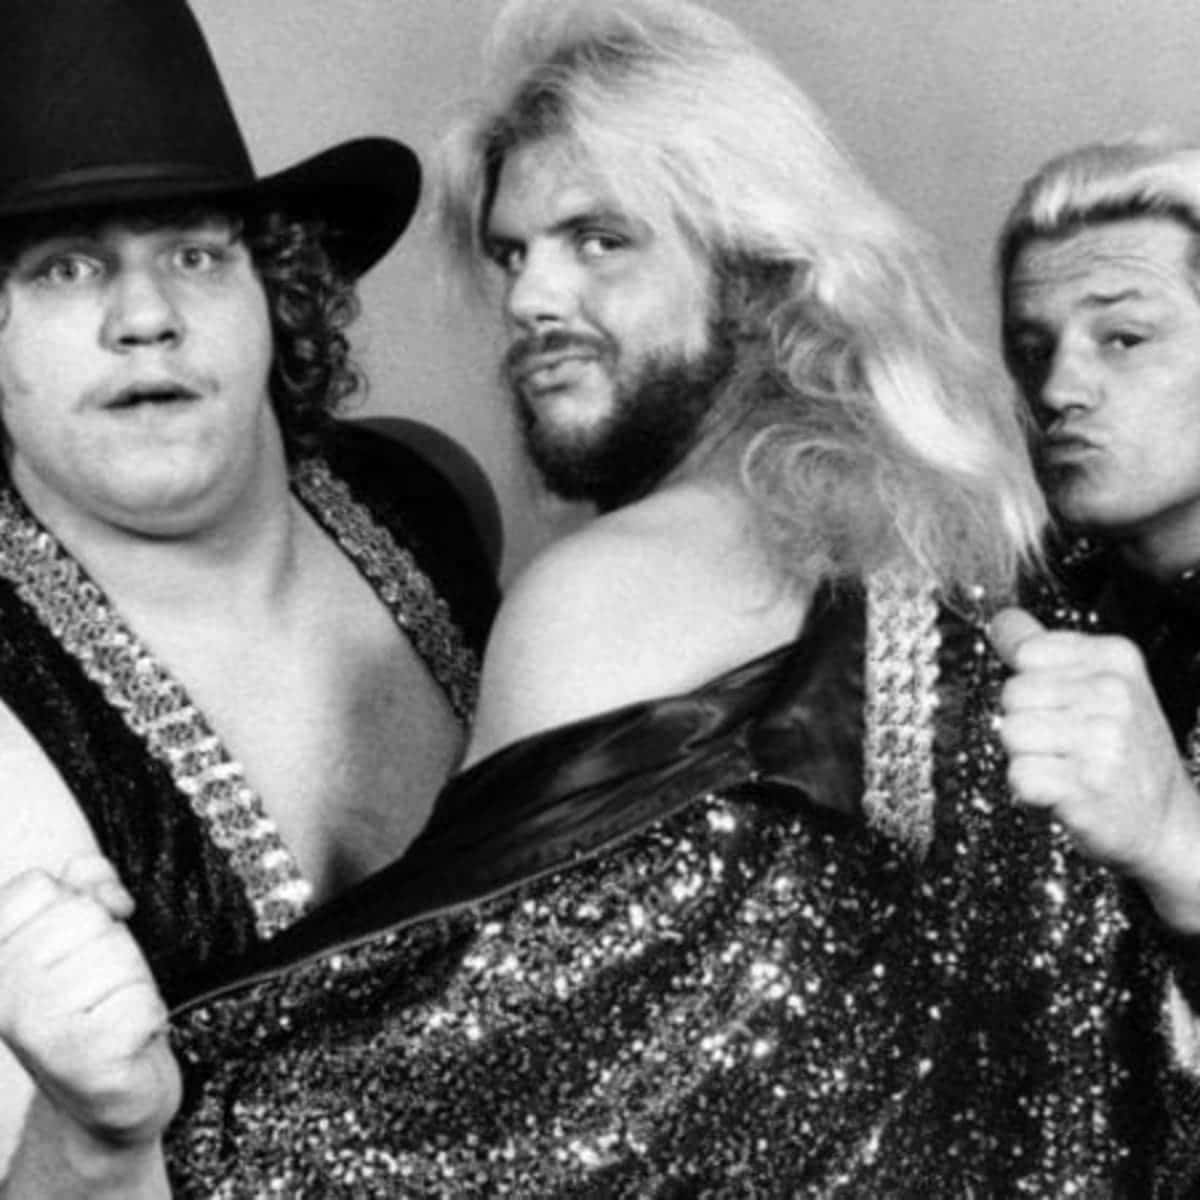 Wrestling Icon Terry Gordy with the Fabulous Freebirds Wallpaper